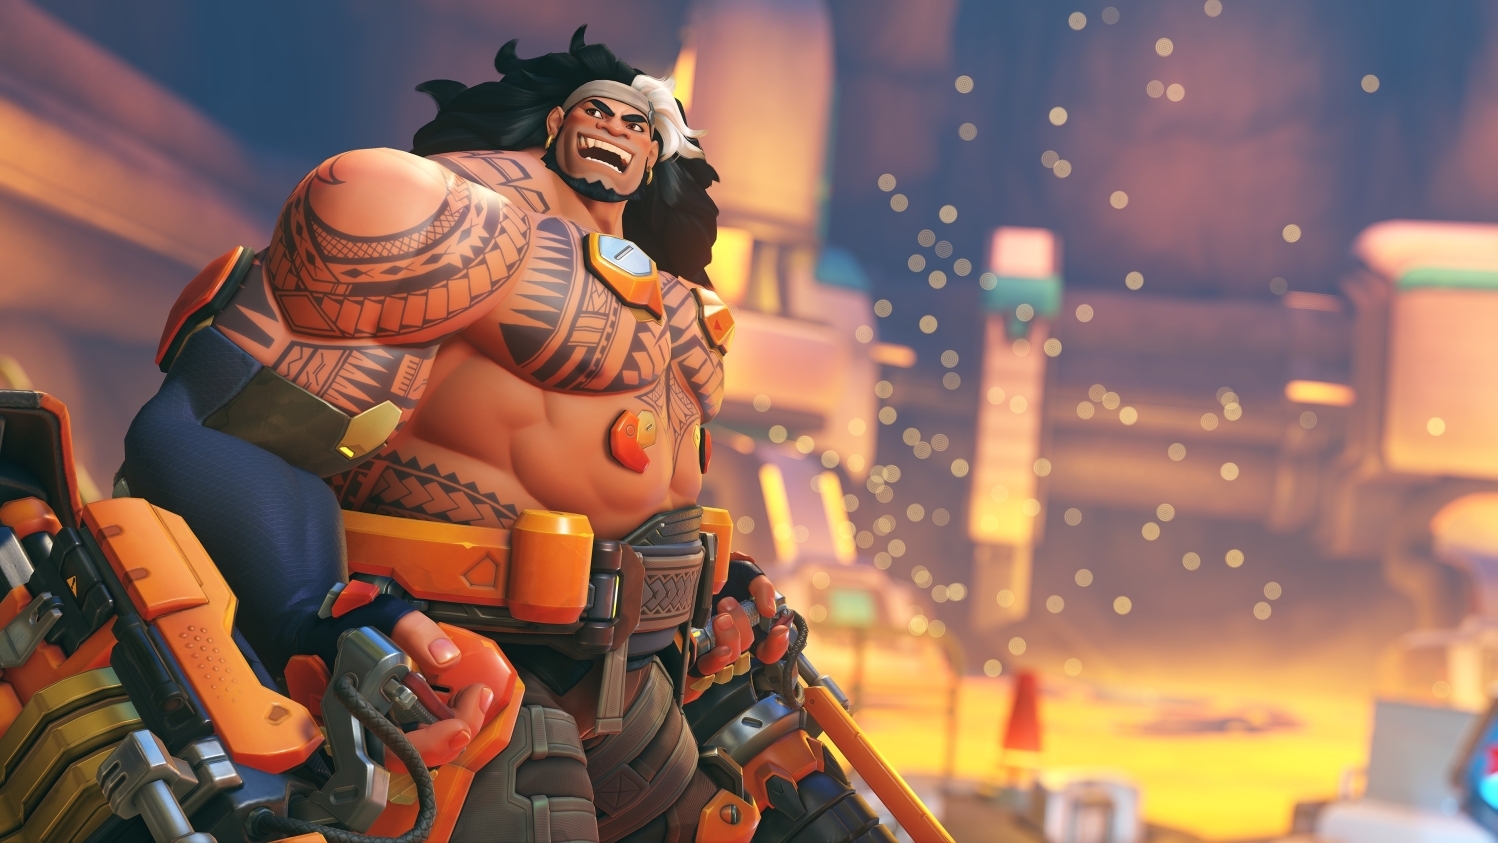 Overwatch: 8 things to know before you play